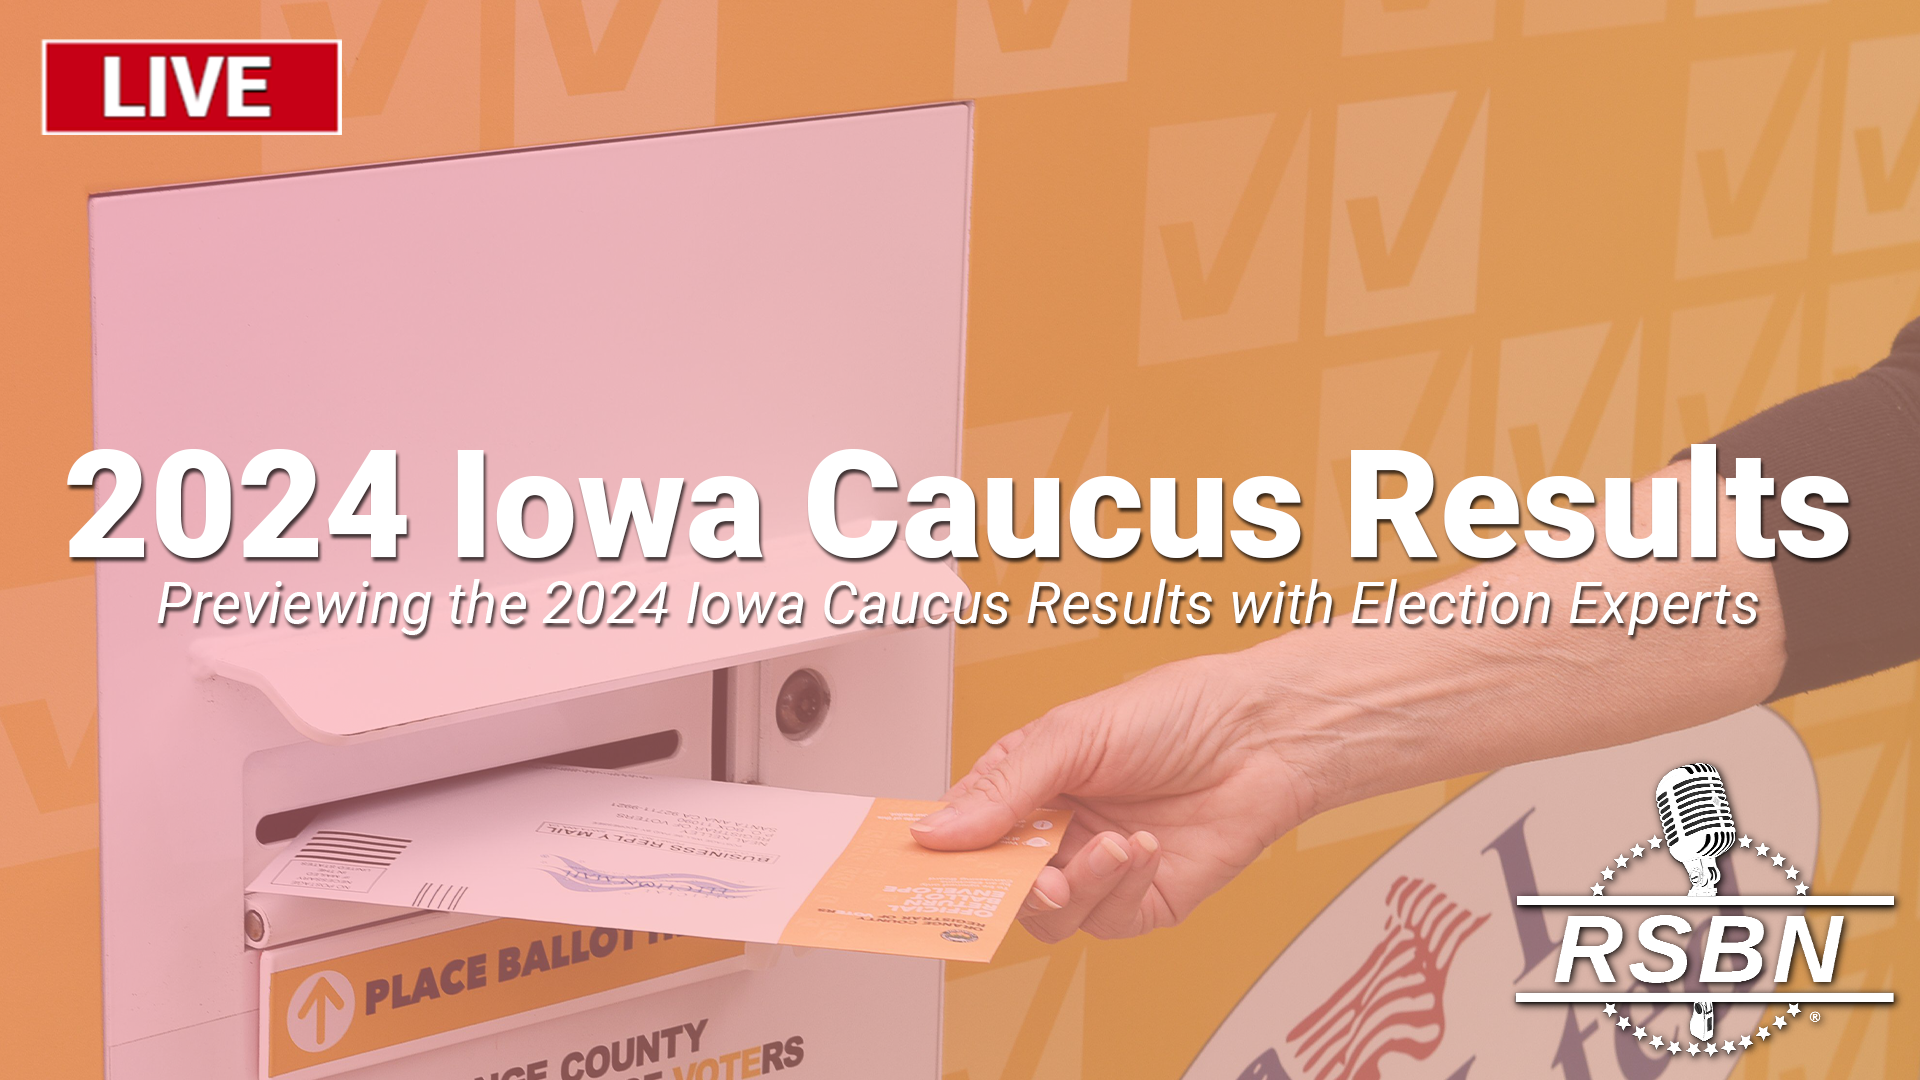 Live Previewing The 2024 Iowa Caucus Results With Election Experts 11524